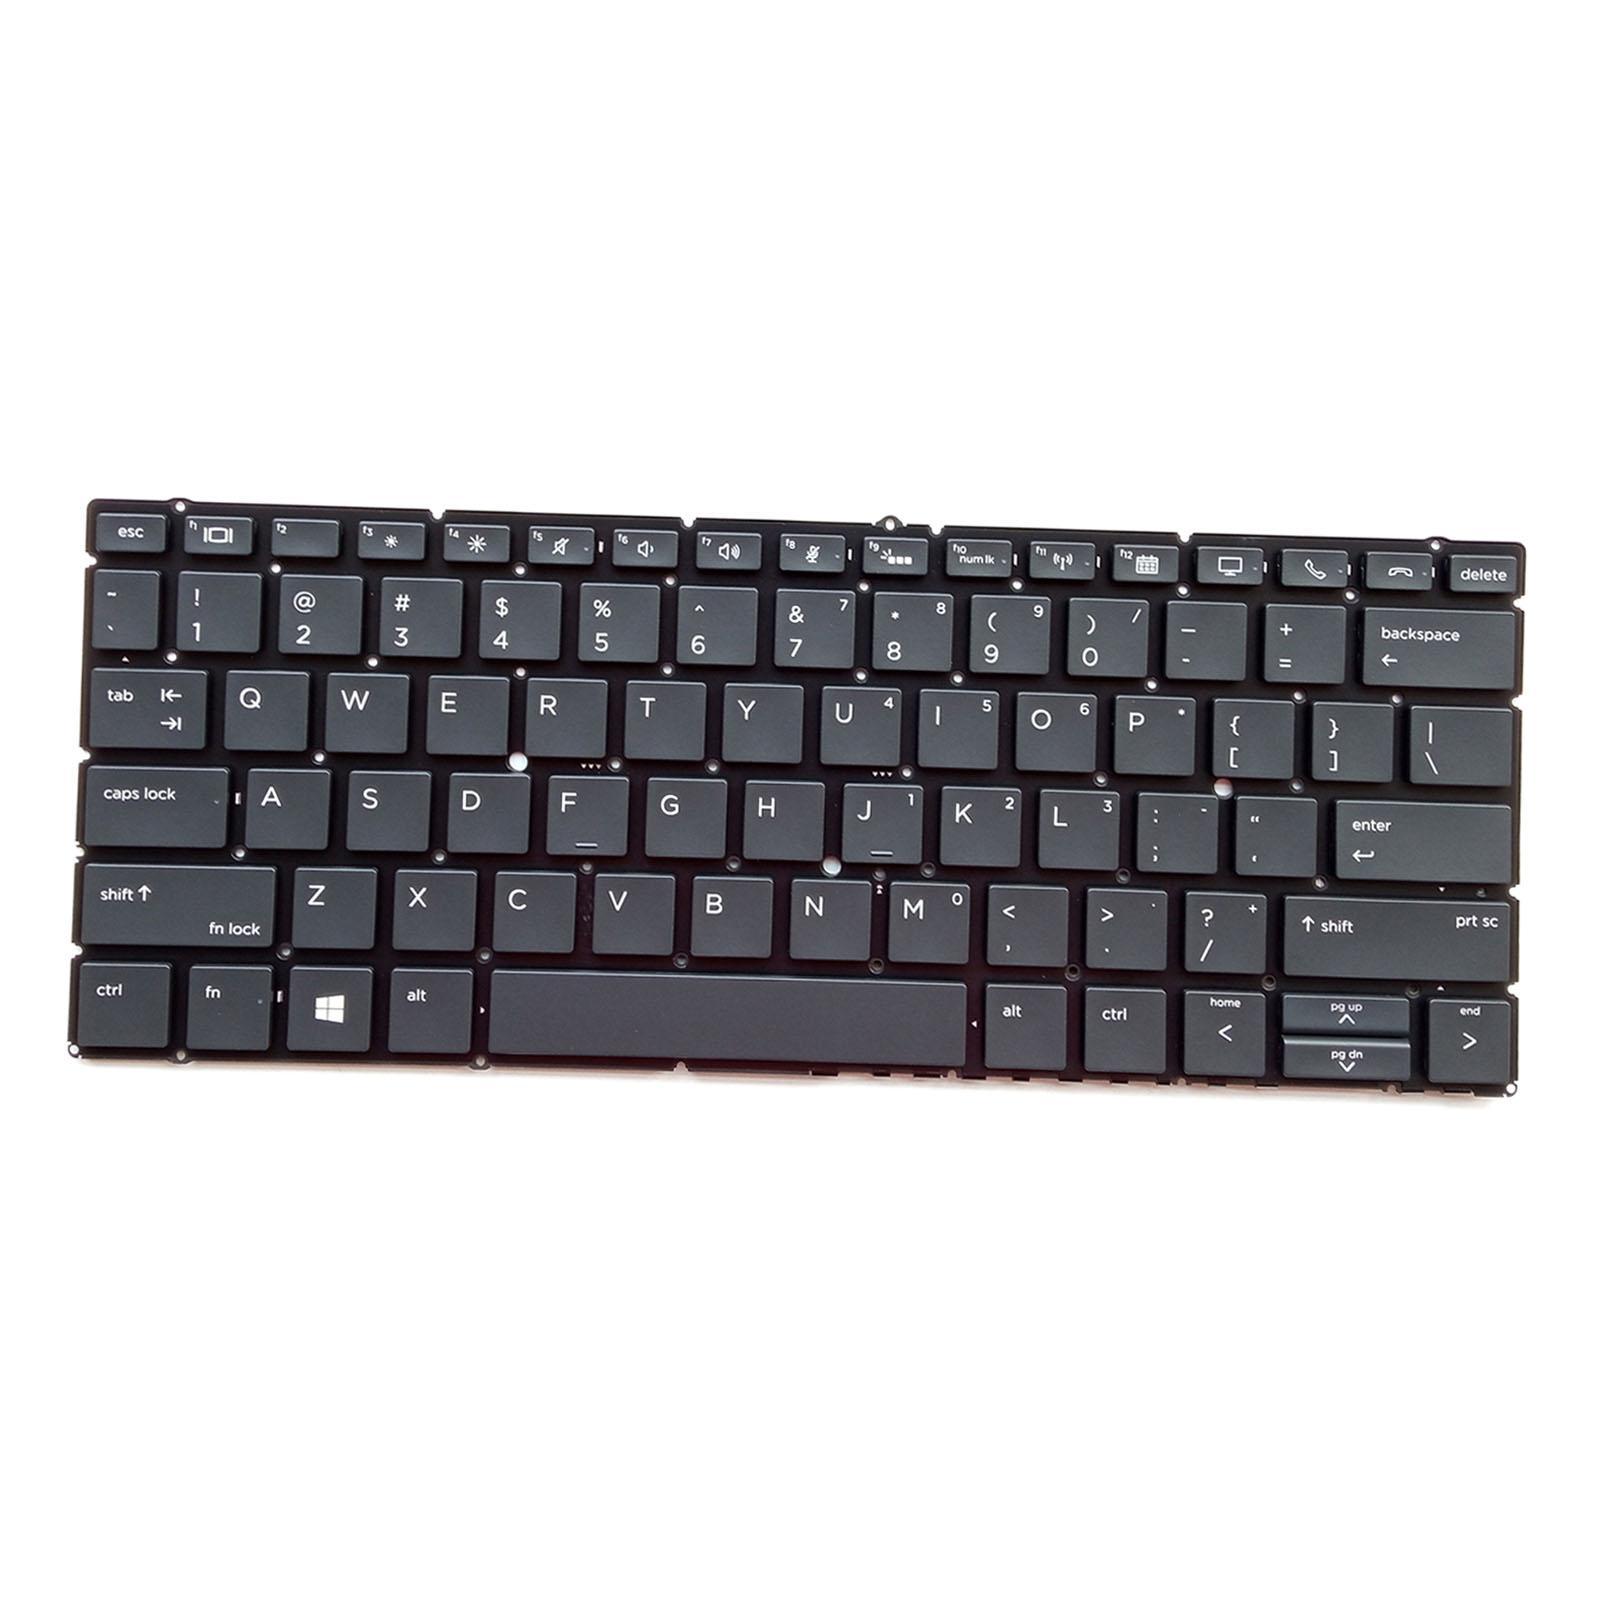 Laptop Keyboard US English with Backlit for x360 830-G5